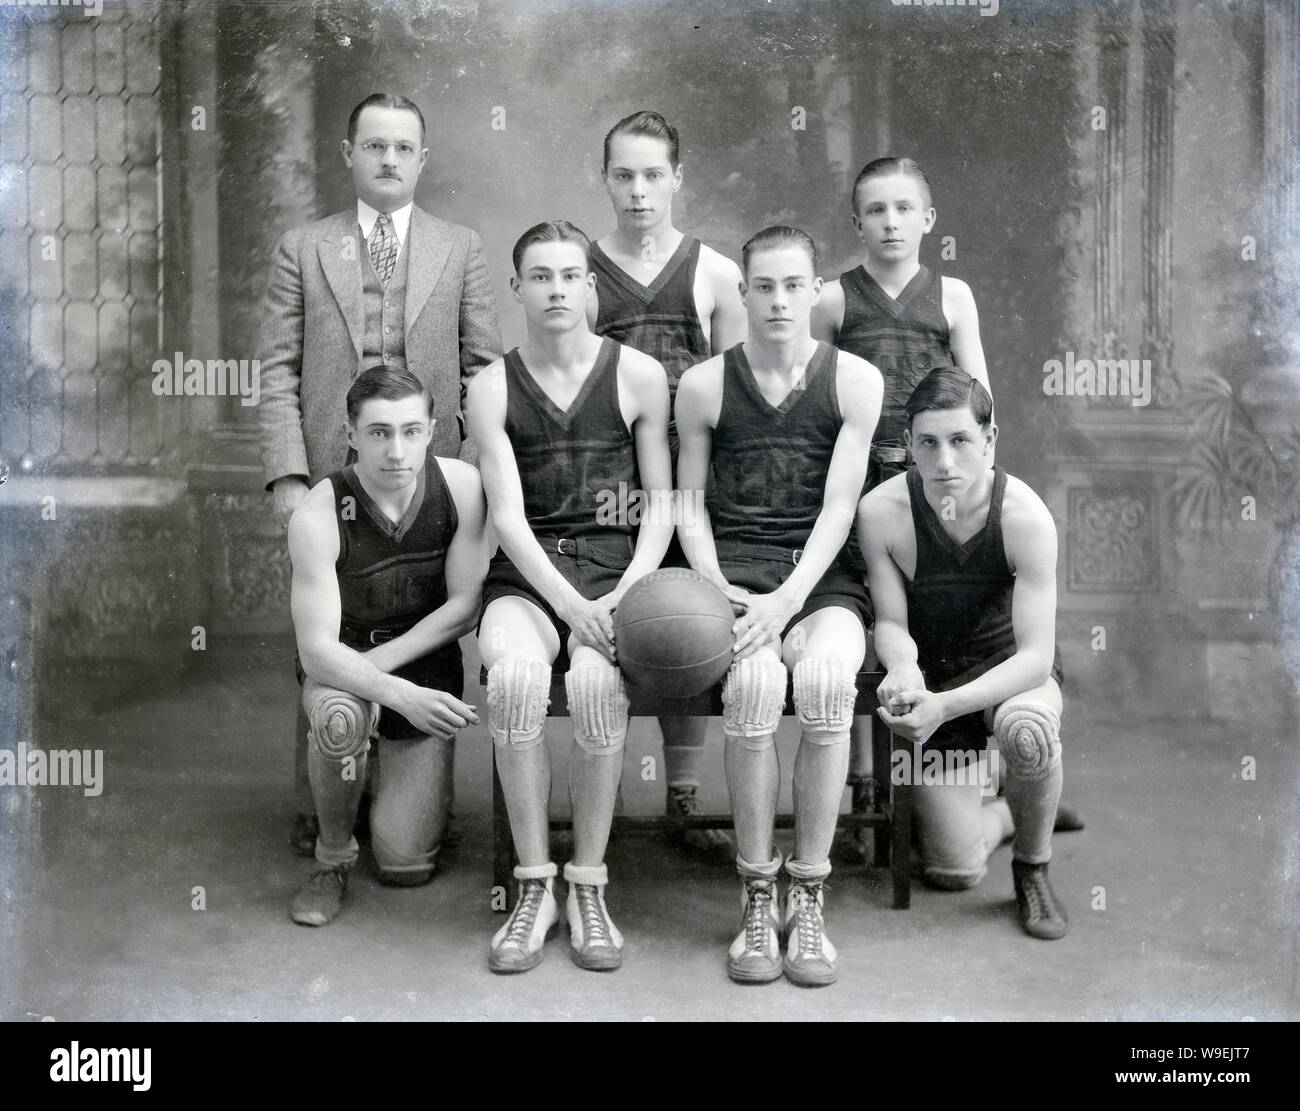 Antique c1915 LHS basketball team with coach photograph. Location unknown, USA. SOURCE: ORIGINAL ACETATE NEGATIVE. Stock Photo